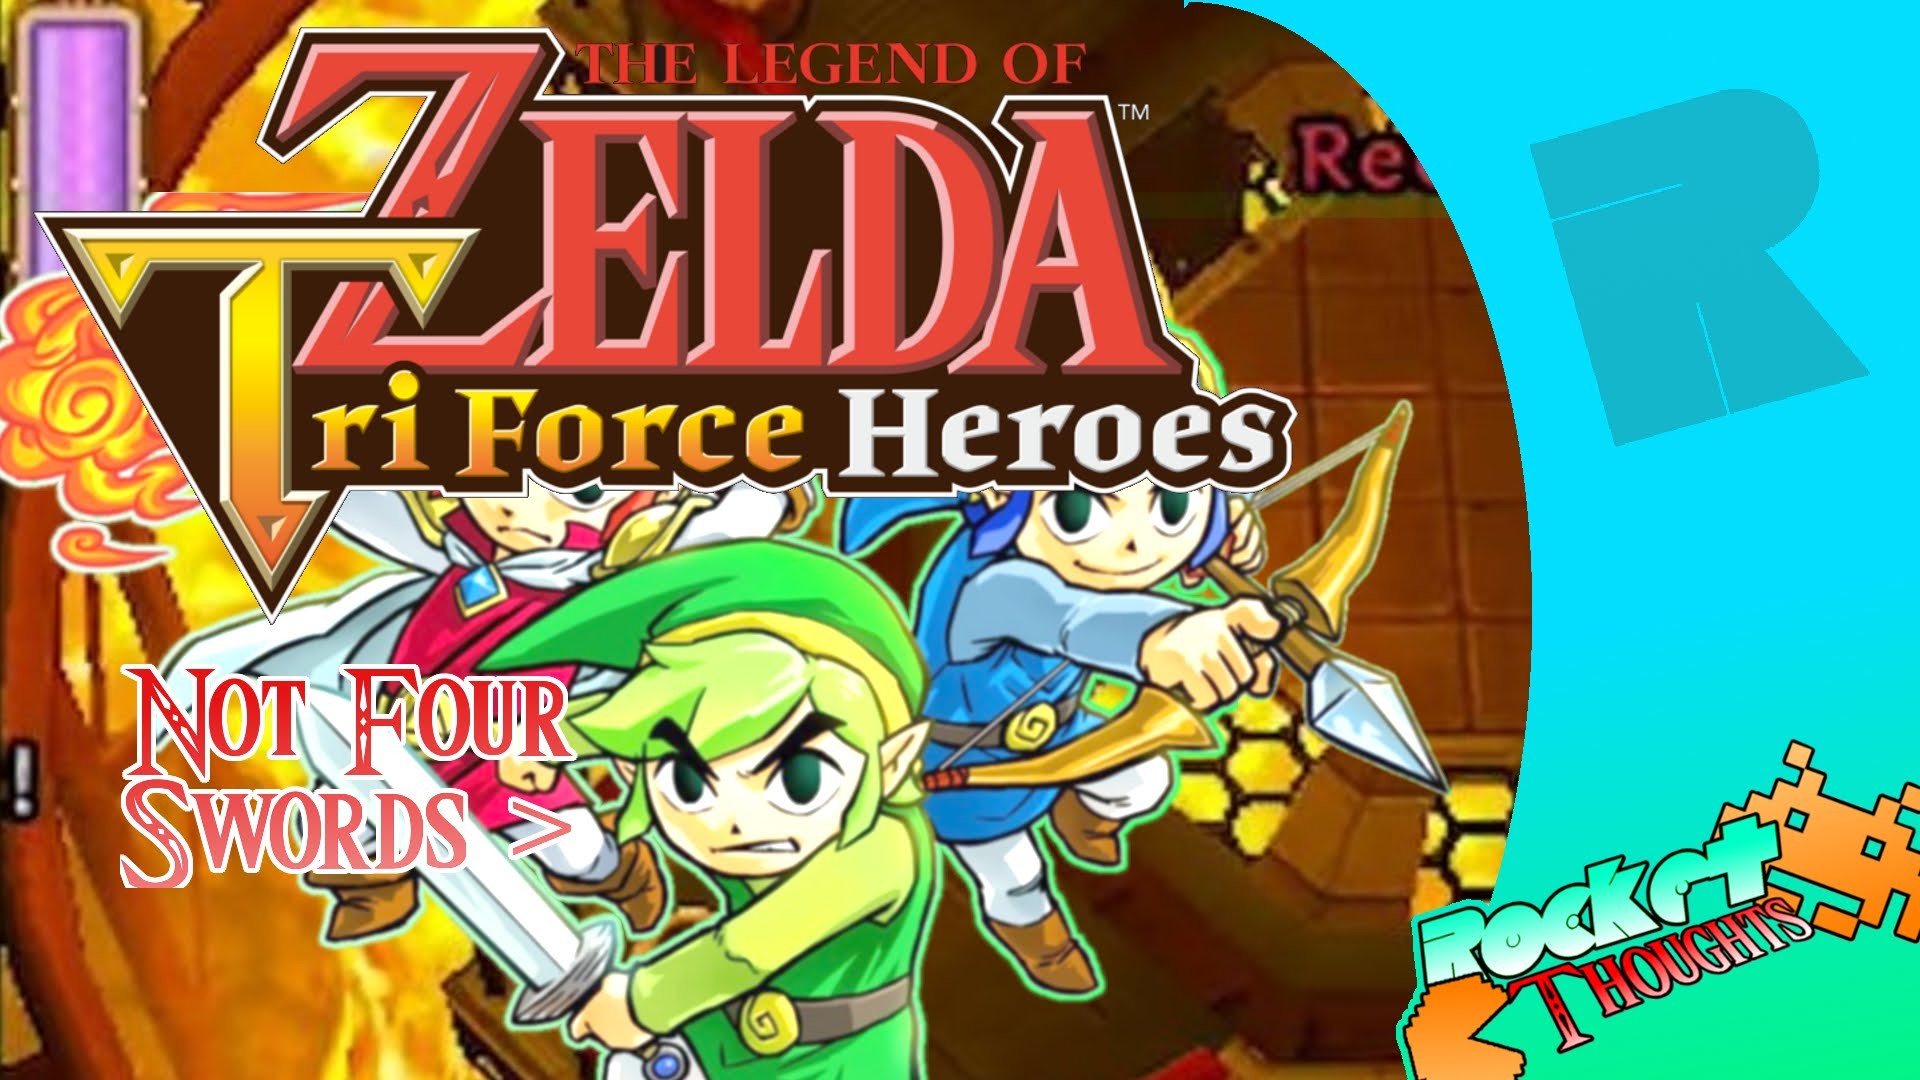 1920x1080 The Legend Of Zelda: Triforce Heroes ISN'T Four Swords! EXPLAINED Gameplay  - Rocket Thoughts - YouTube